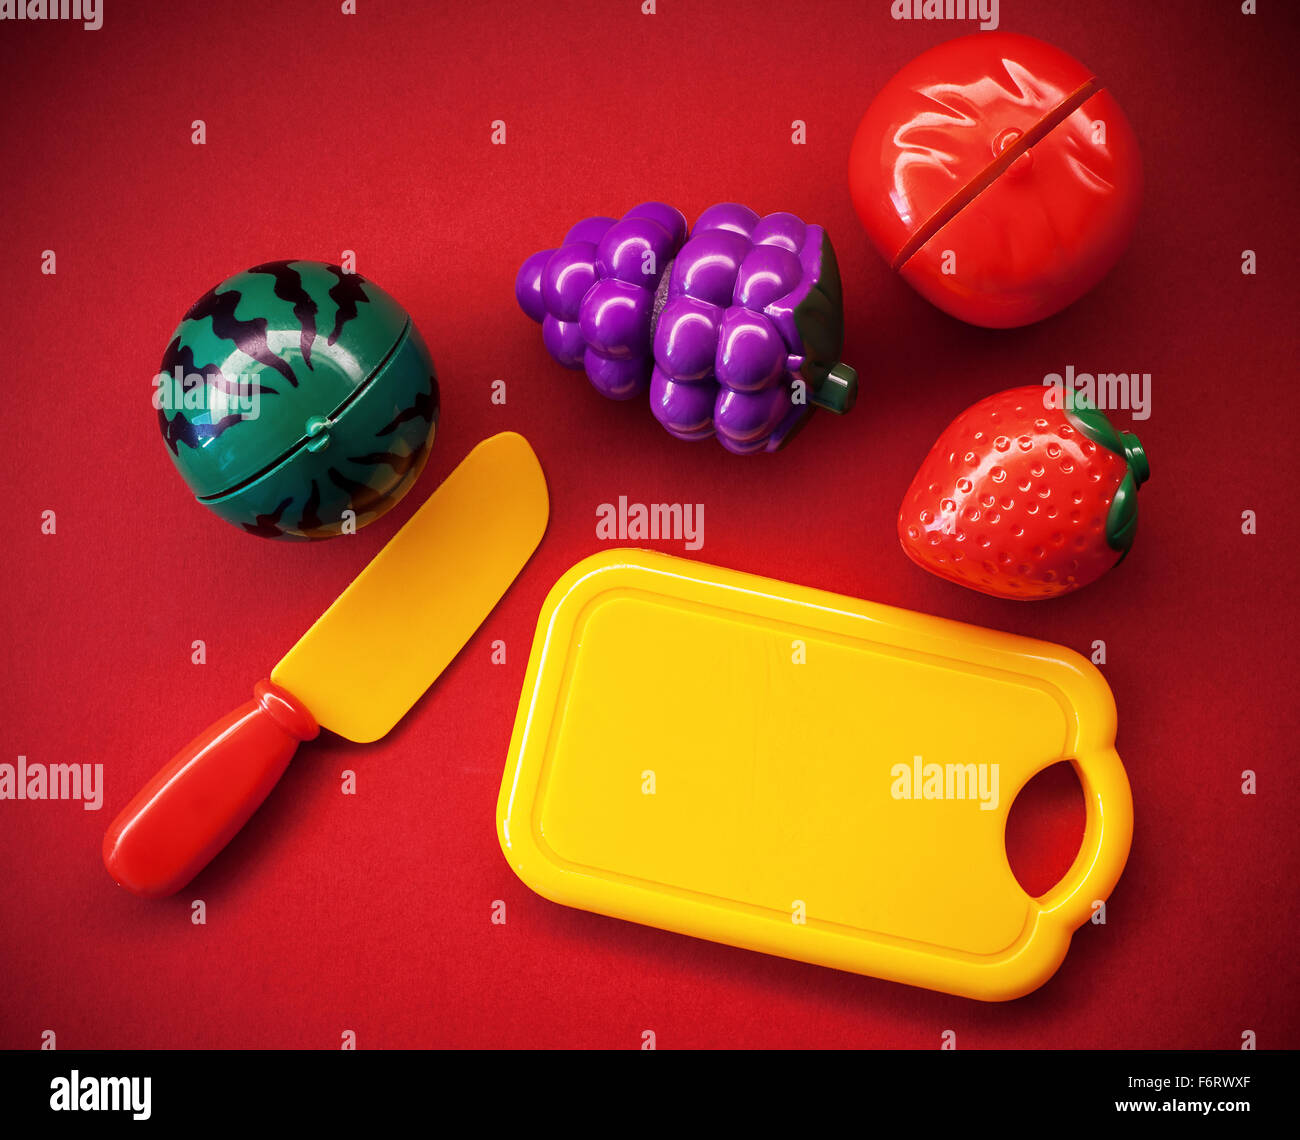 Plastic fruits and vegetables as toys, on red background. Stock Photo